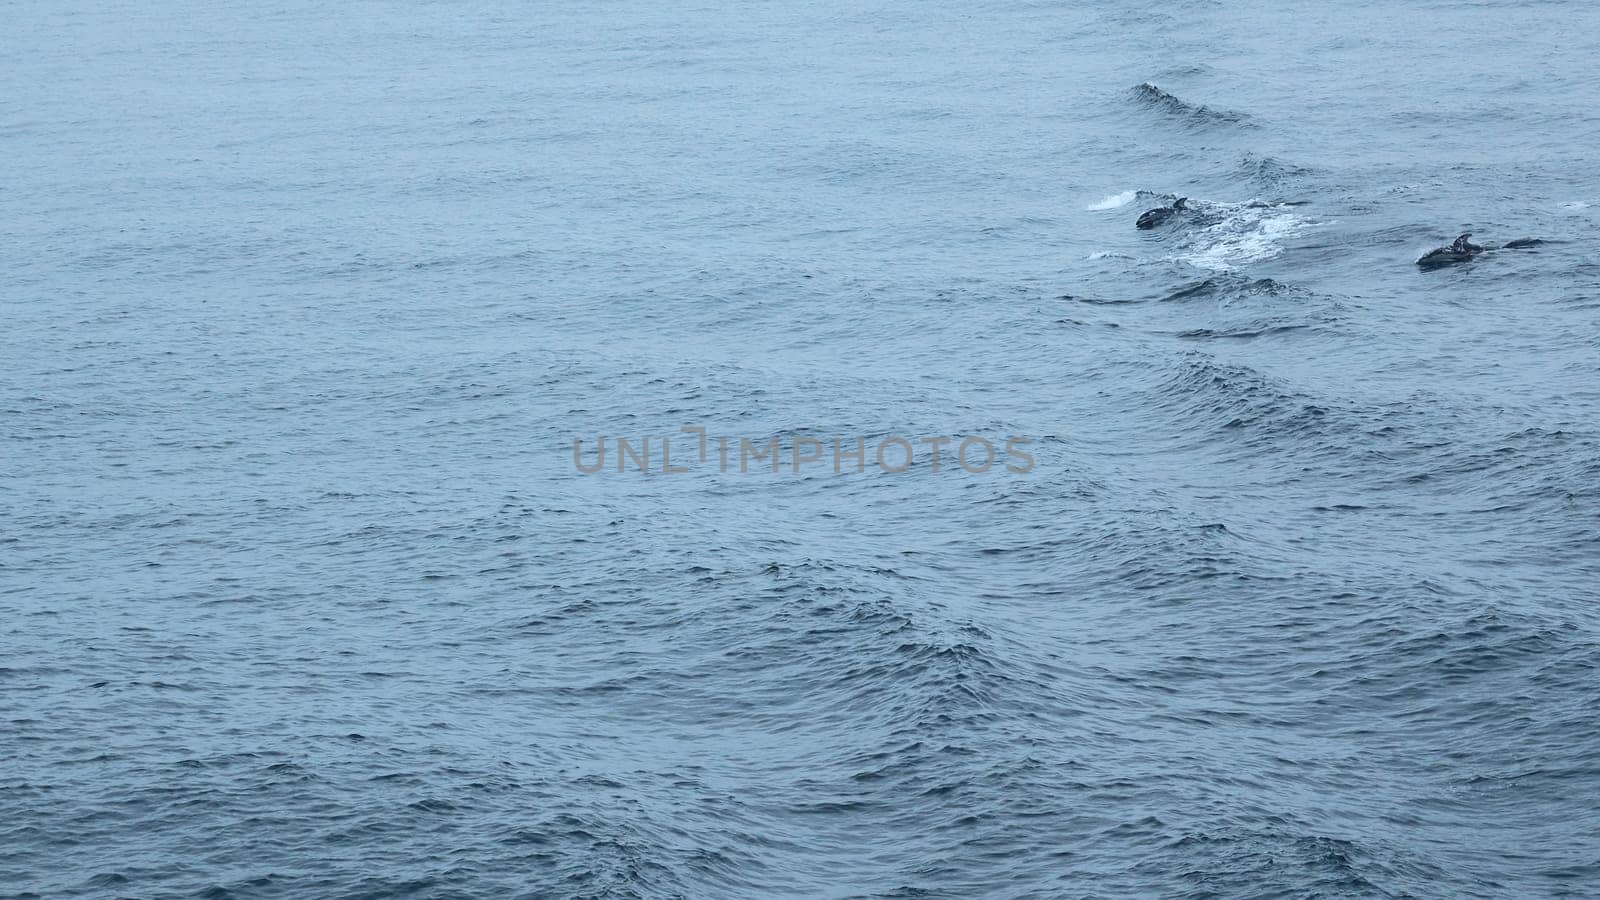 Blue sea with waves and swimming dolphins. Clip. Wild dolphins swimming in open sea in cloudy weather. Exciting sight of swimming dolphins on ocean surface.